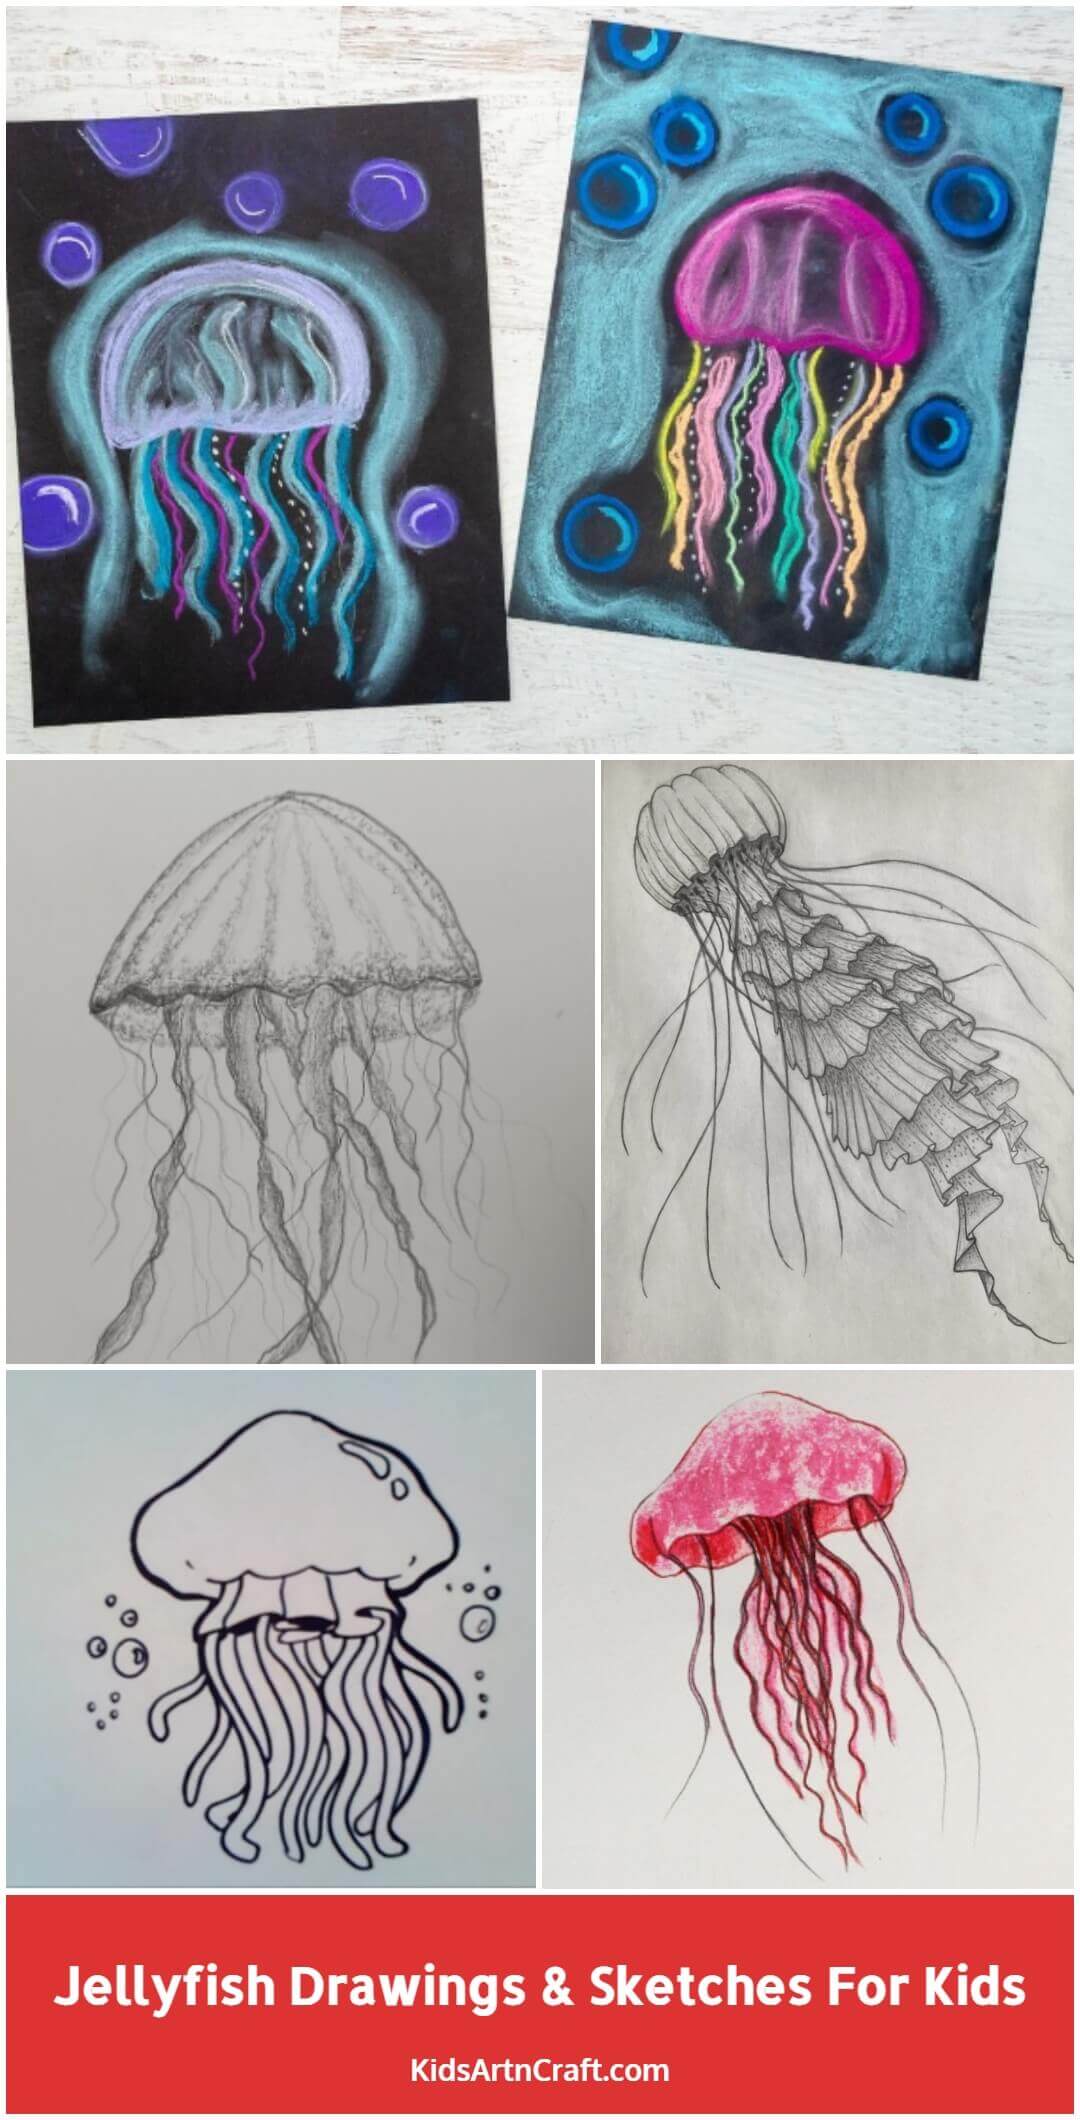 Jellyfish Drawings & Sketches For Kids